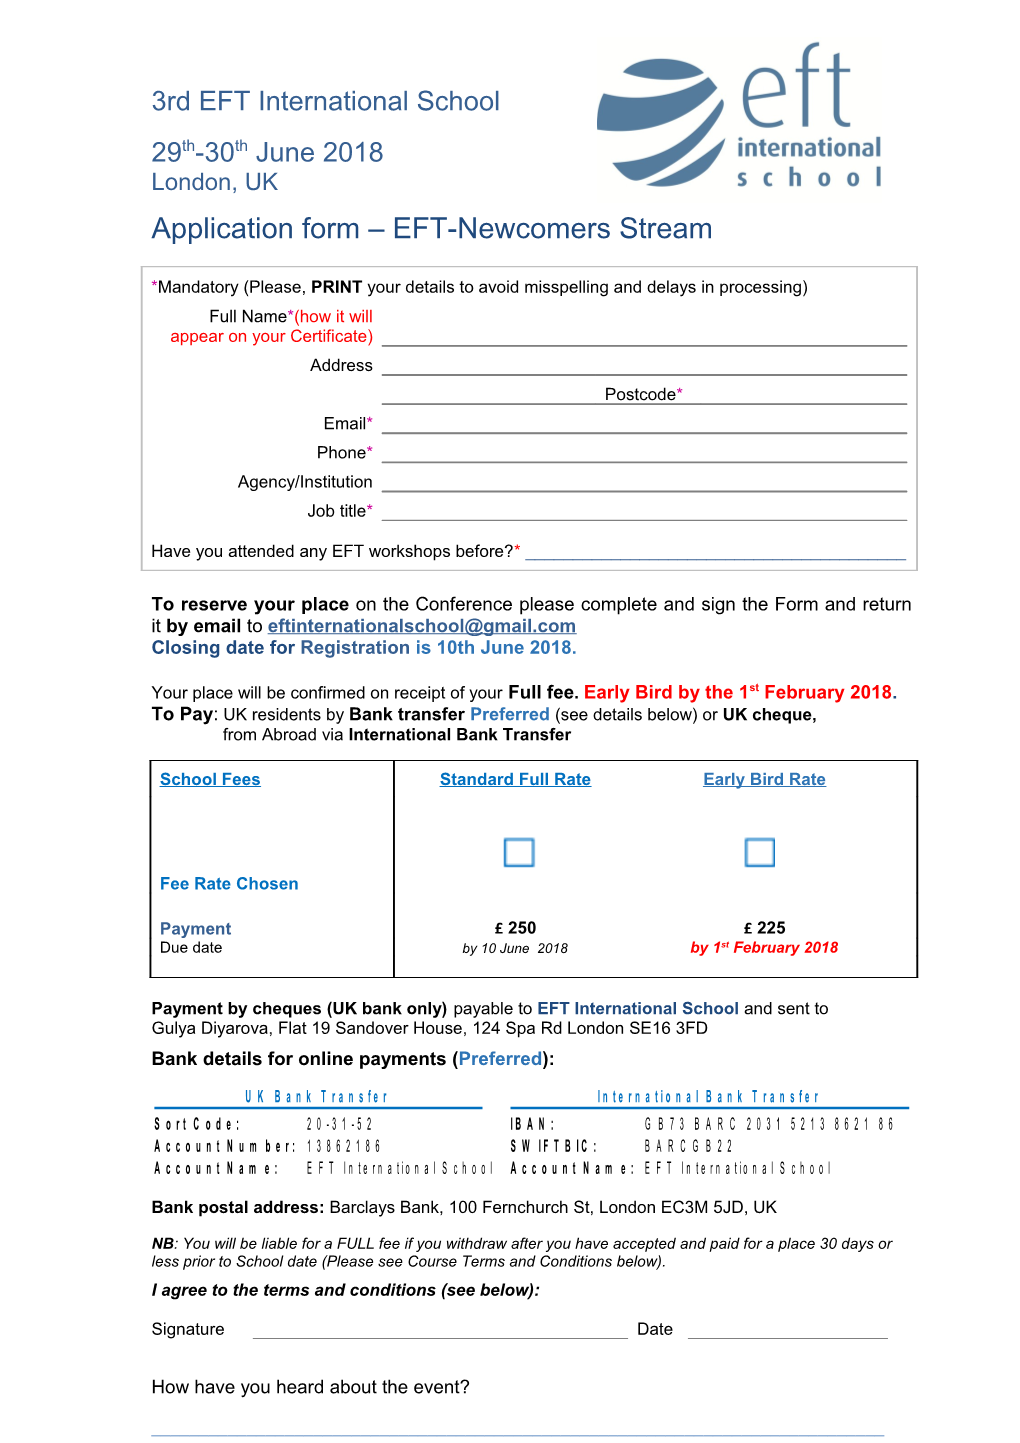 Application Form EFT-Newcomers Stream